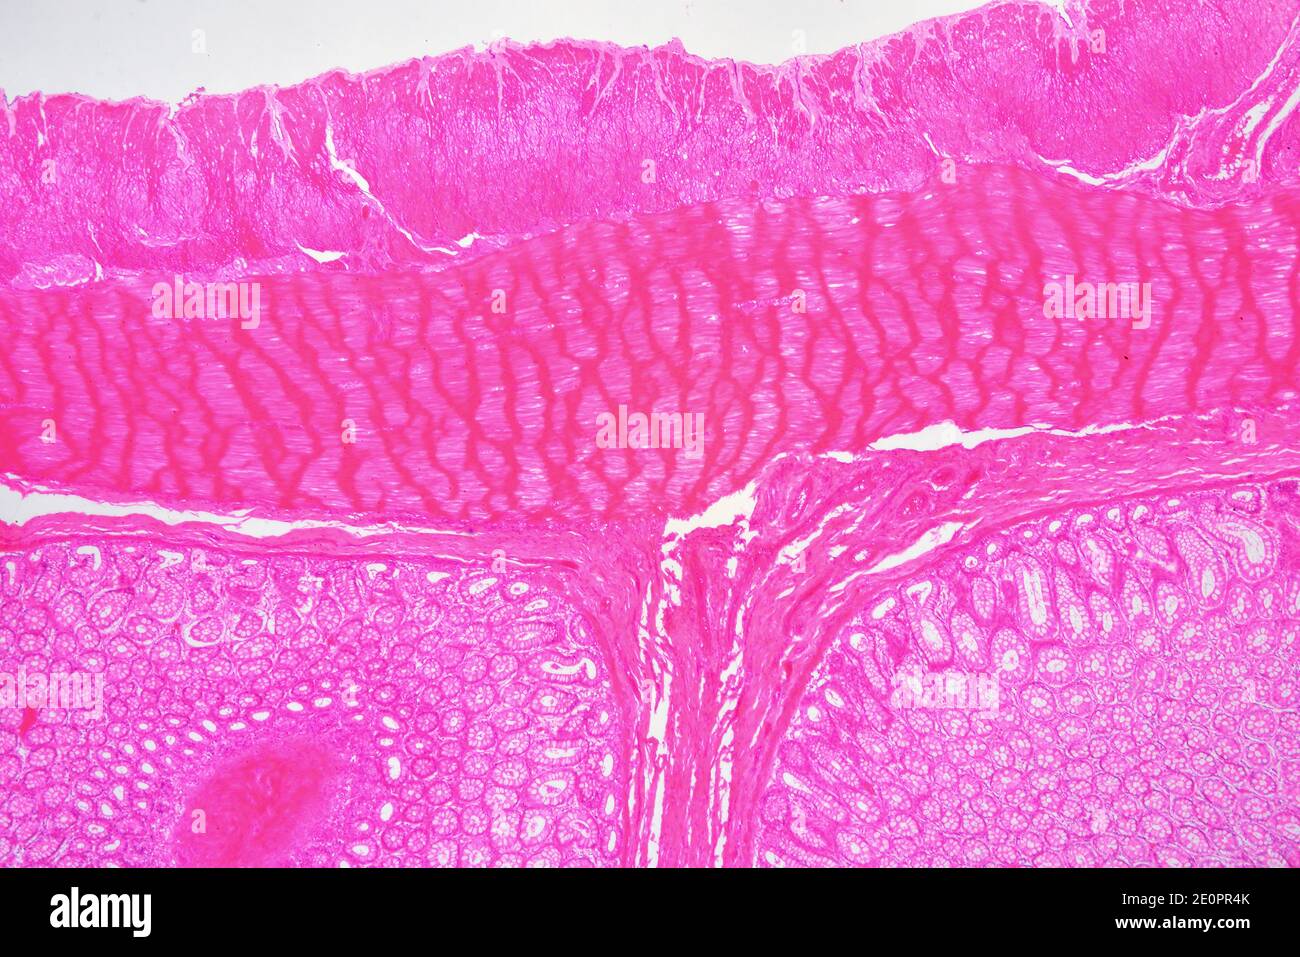 Human large intestine (colon) showing from top to bottom: muscular layers, submucosa and mucosa with Lieberkhun crypts. X25 at 10 cm wide. Stock Photo